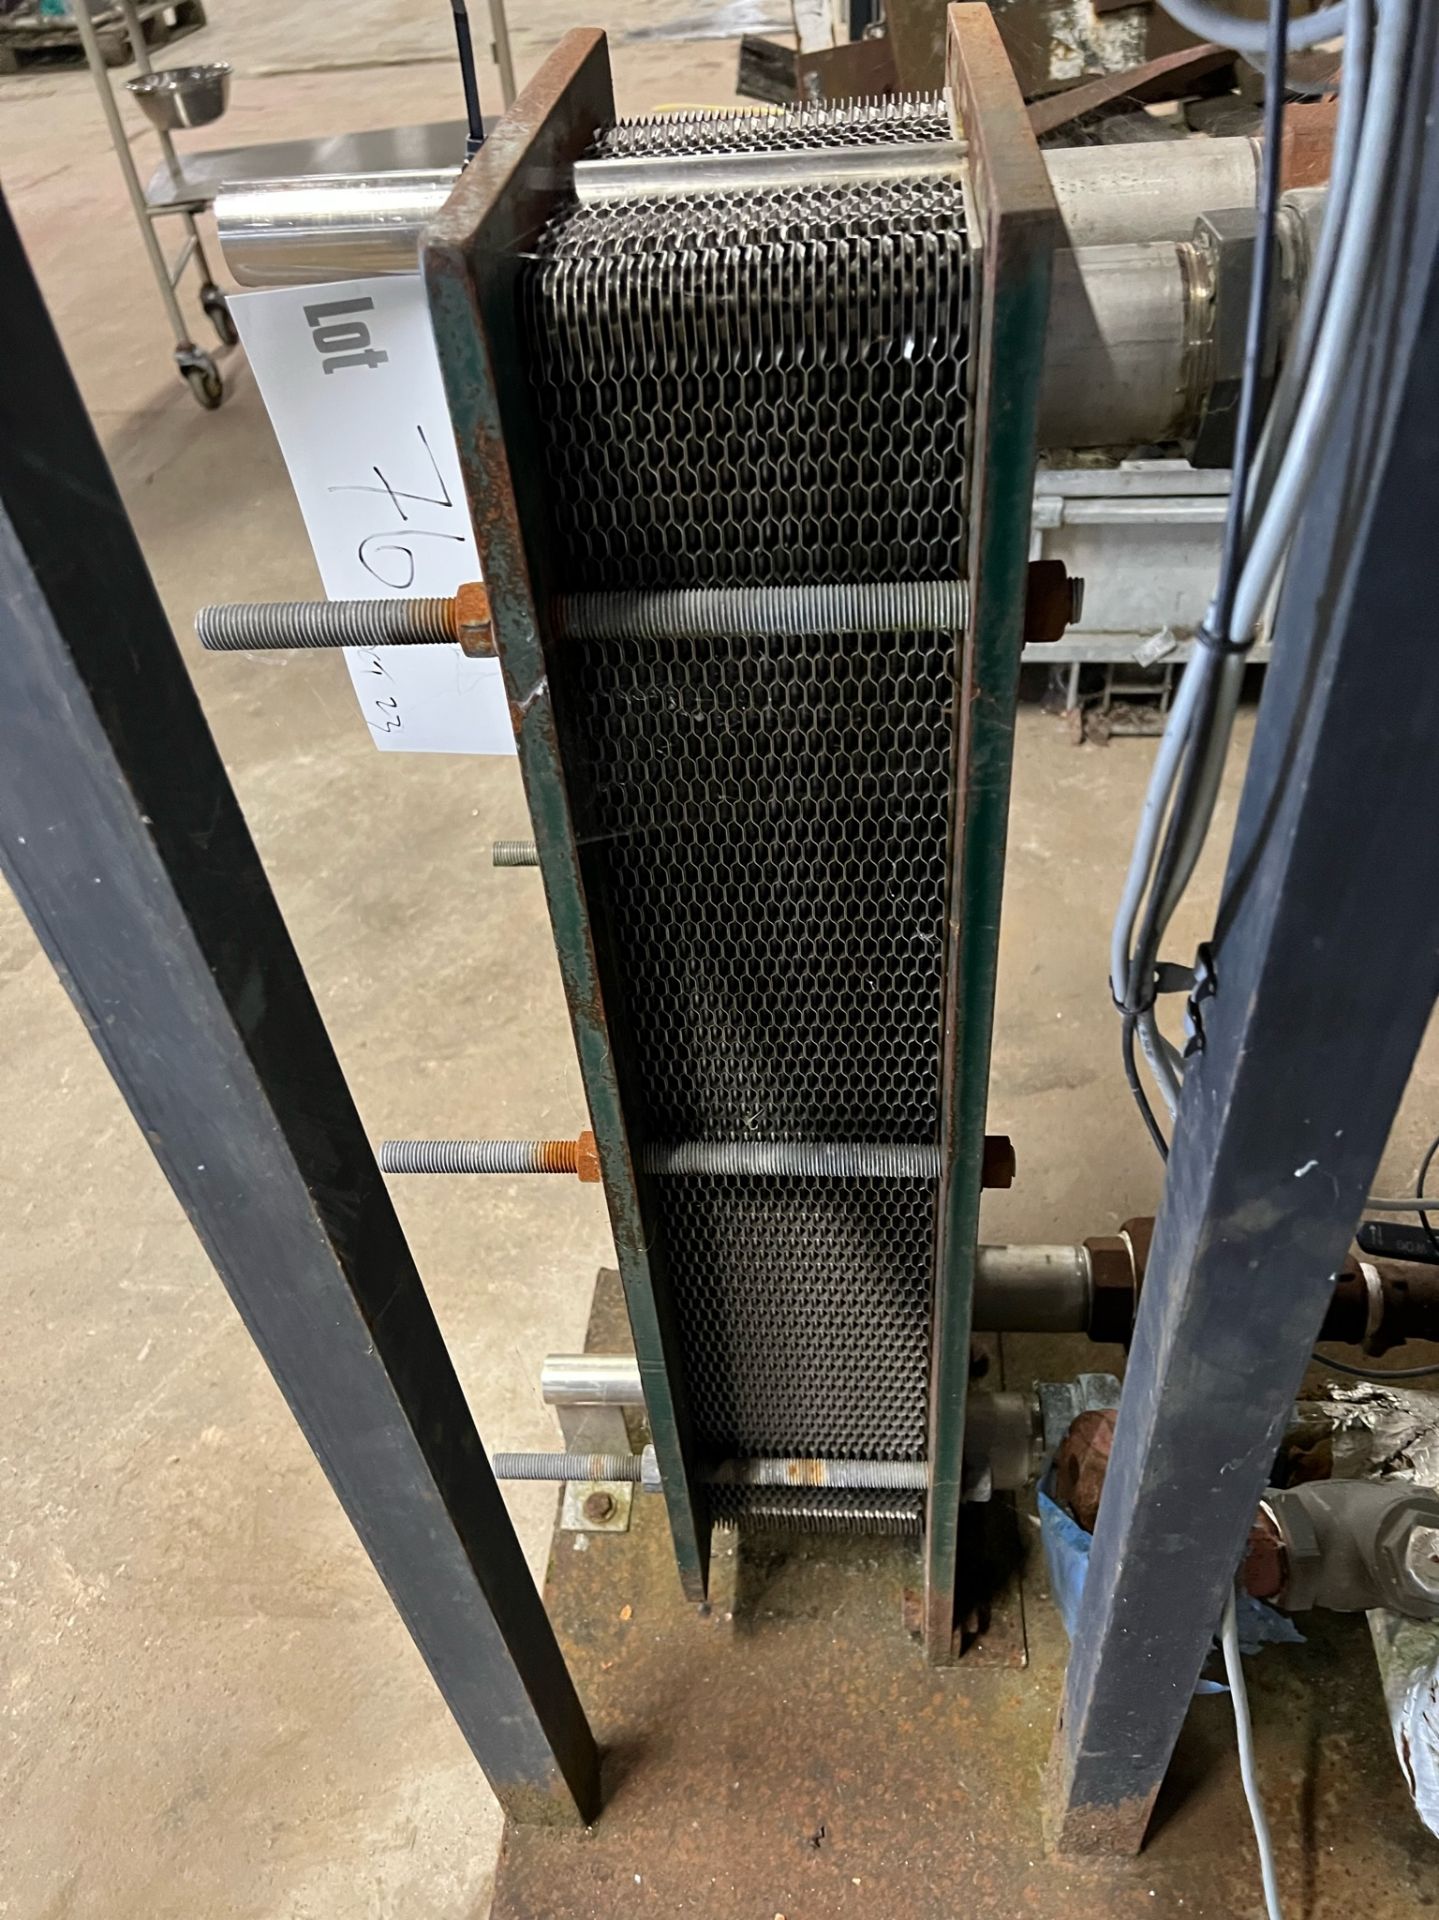 Ormandy Heat Exchanger, mounted on skid, with assorted valves and pump etc., approx. 1.5m x 0.6m x - Image 6 of 6